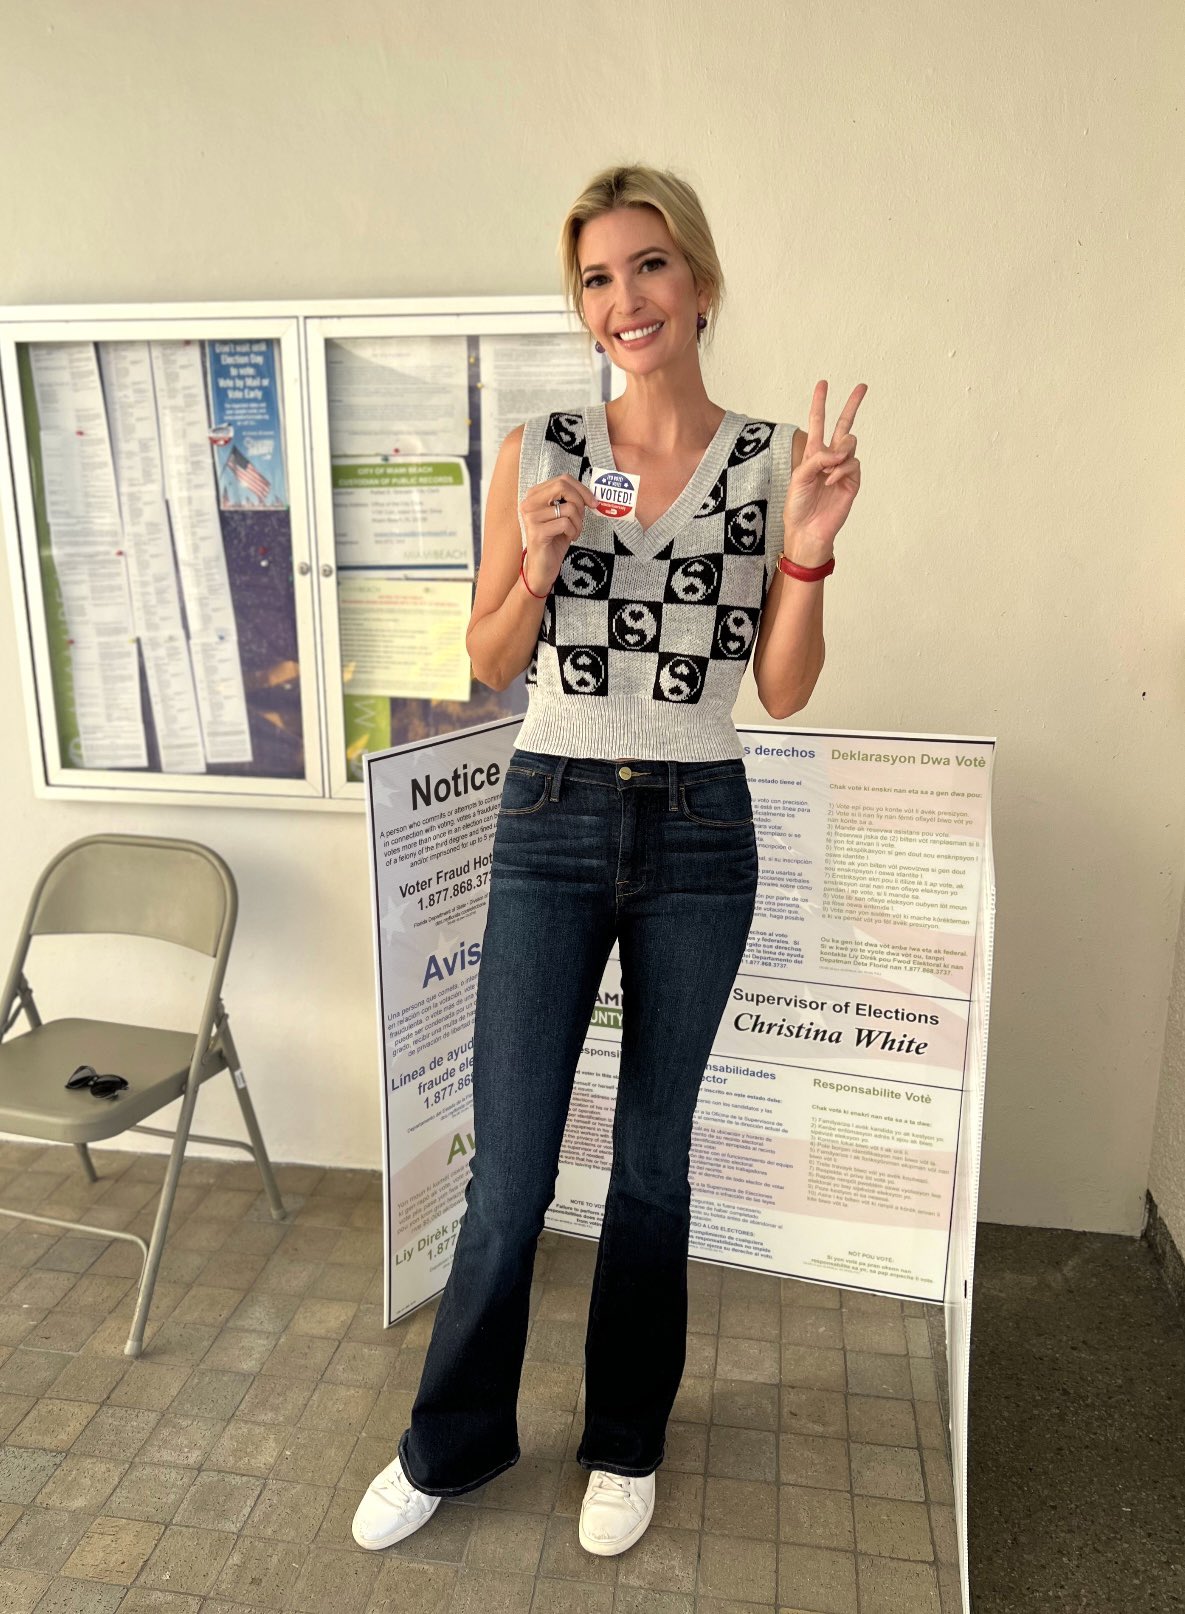 Ivanka Trump on Twitter: "Voted! https://t.co/DY5DBue50w" /